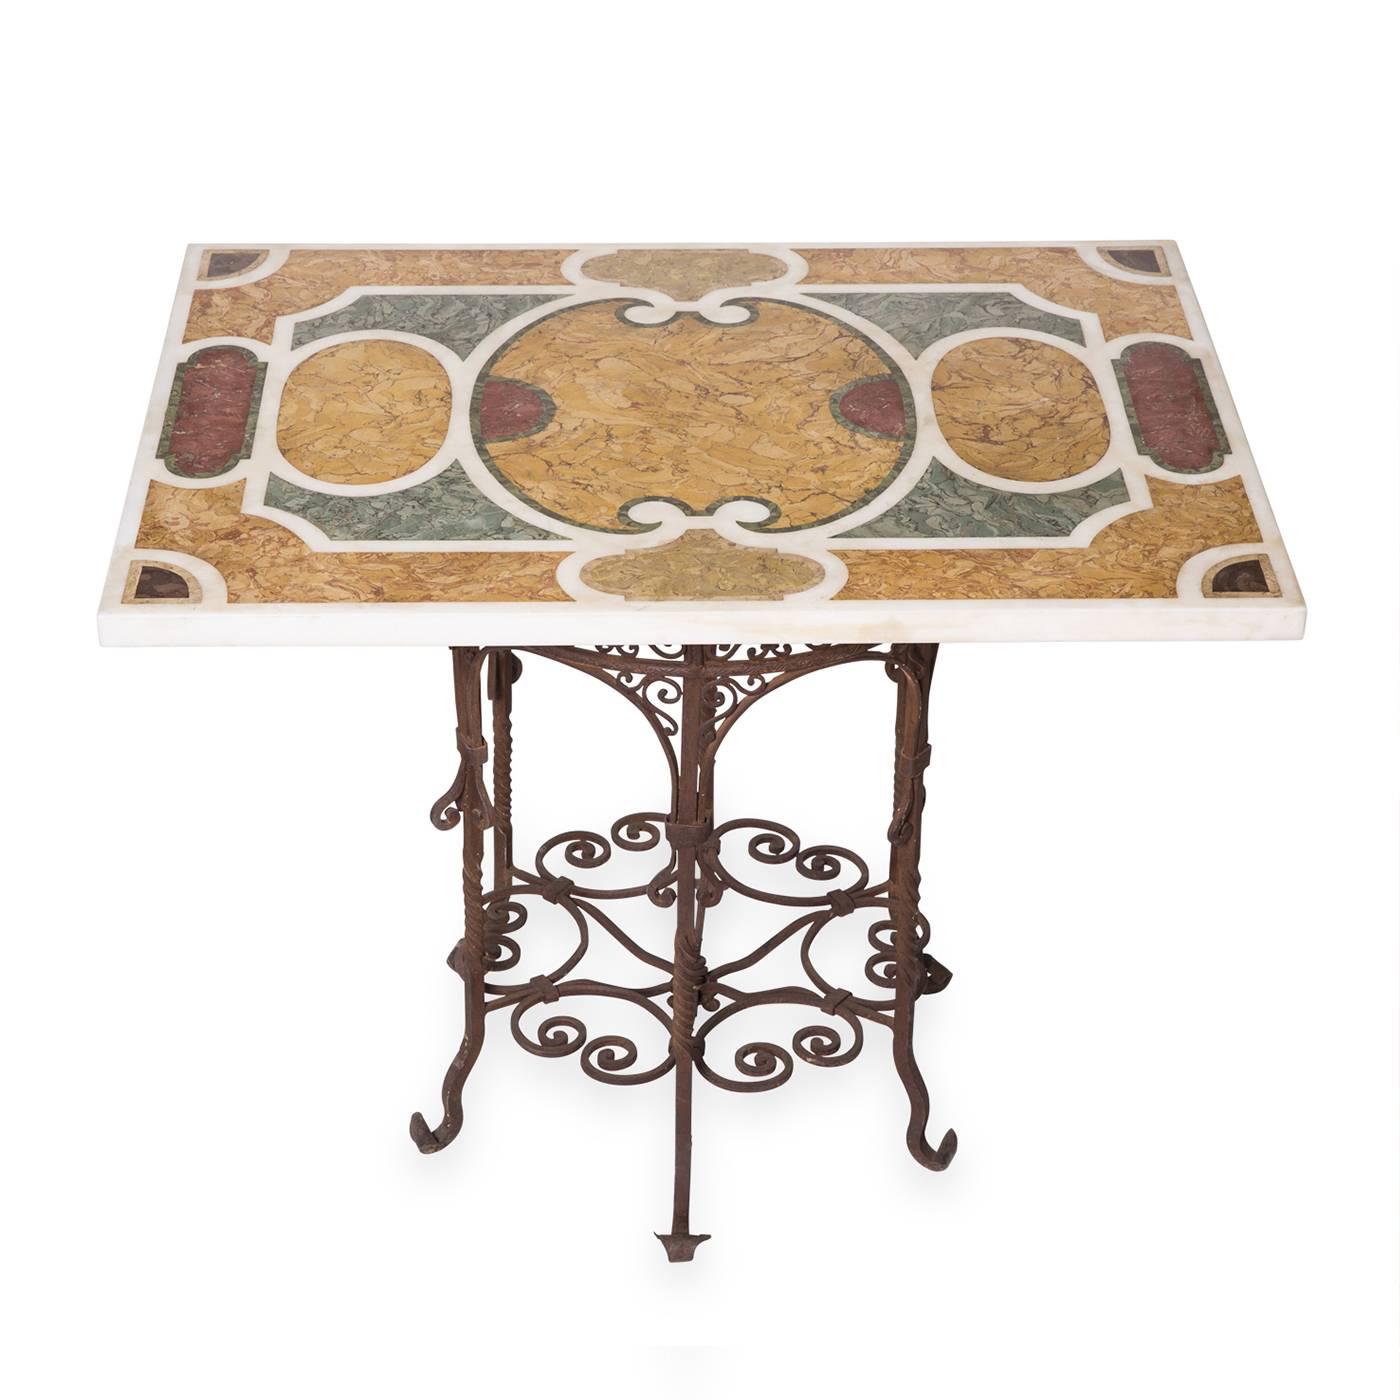 This handmade tabletop is an ode to the colors and shapes of Roman architecture and lifestyle. The white marble is inlaid with colorful marbles employing the traditional scagliola technique and rests on an antique, hand-forged wrought iron base.